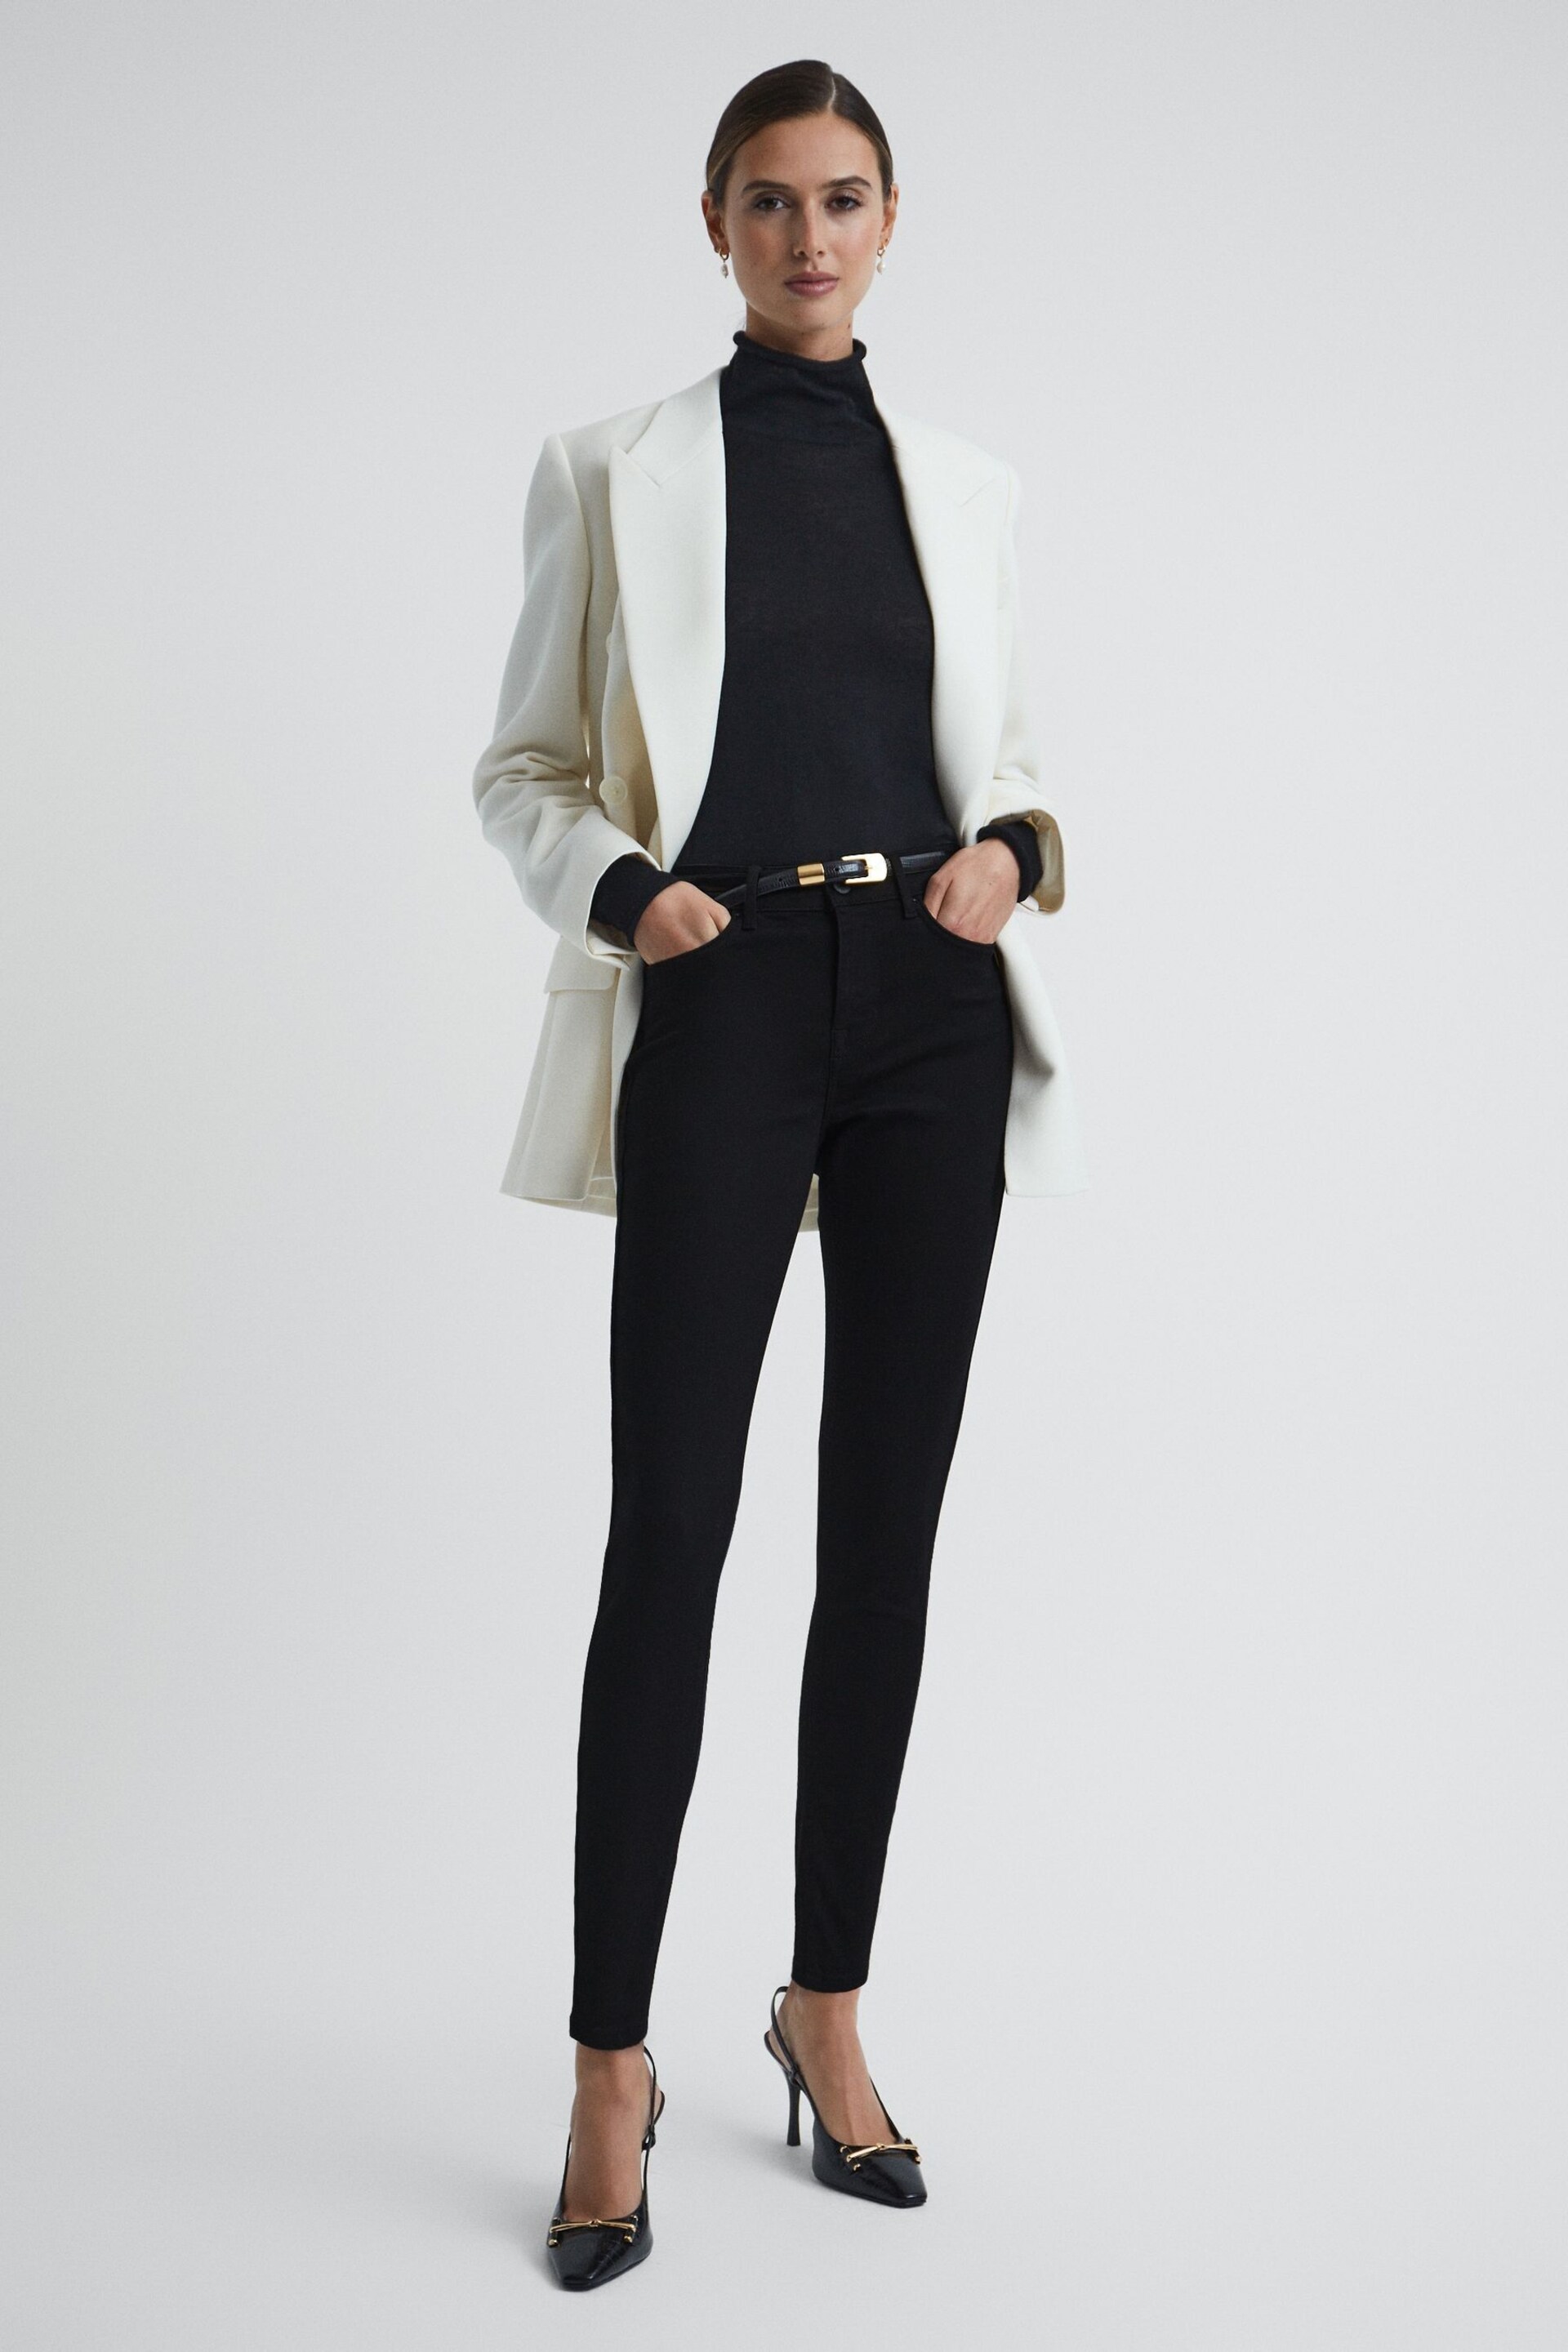 Reiss Black Lux Mid Rise Skinny Jeans - Image 1 of 4